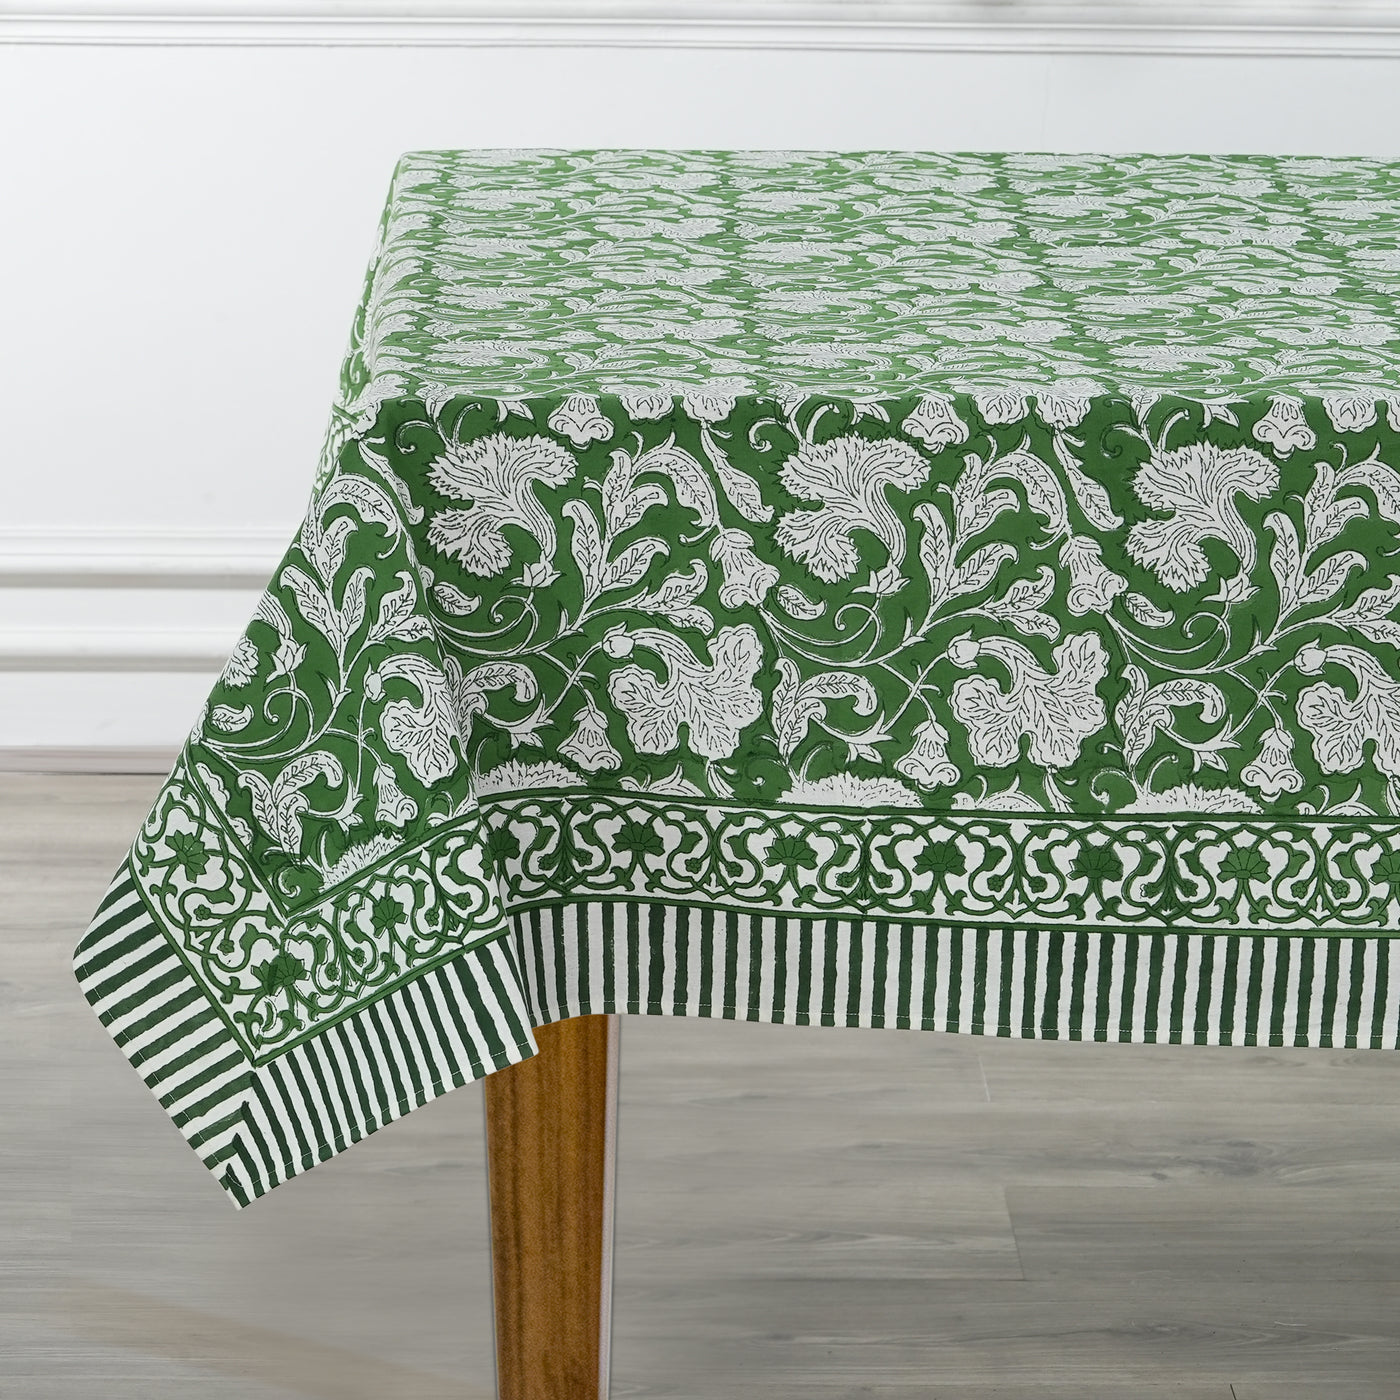 Fabricrush Pantone Artichoke Green, Pink and Yellow Indian Floral Hand Block Printed Cotton Cloth Tablecloth, Table Cover, Farmhouse Wedding Events Home Party